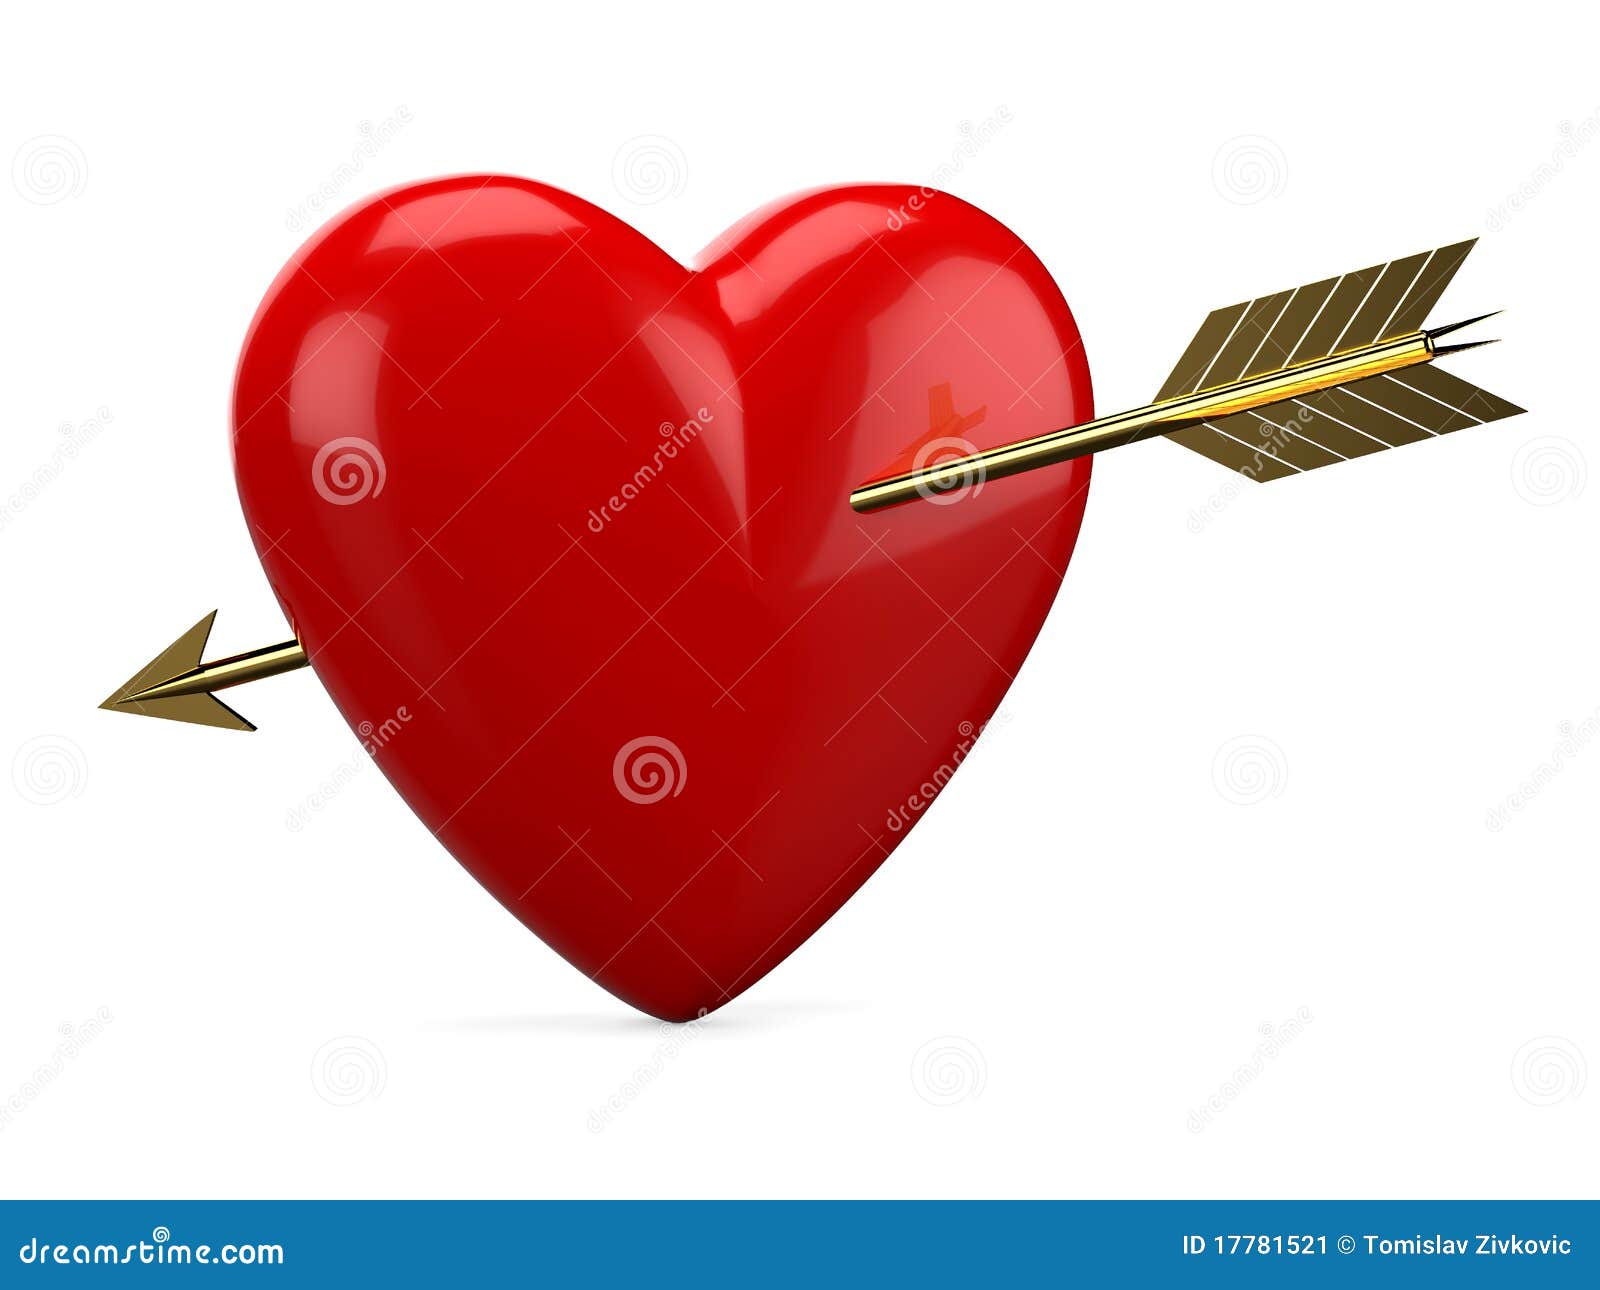 Red heart pierced with golden arrow isolated on white background